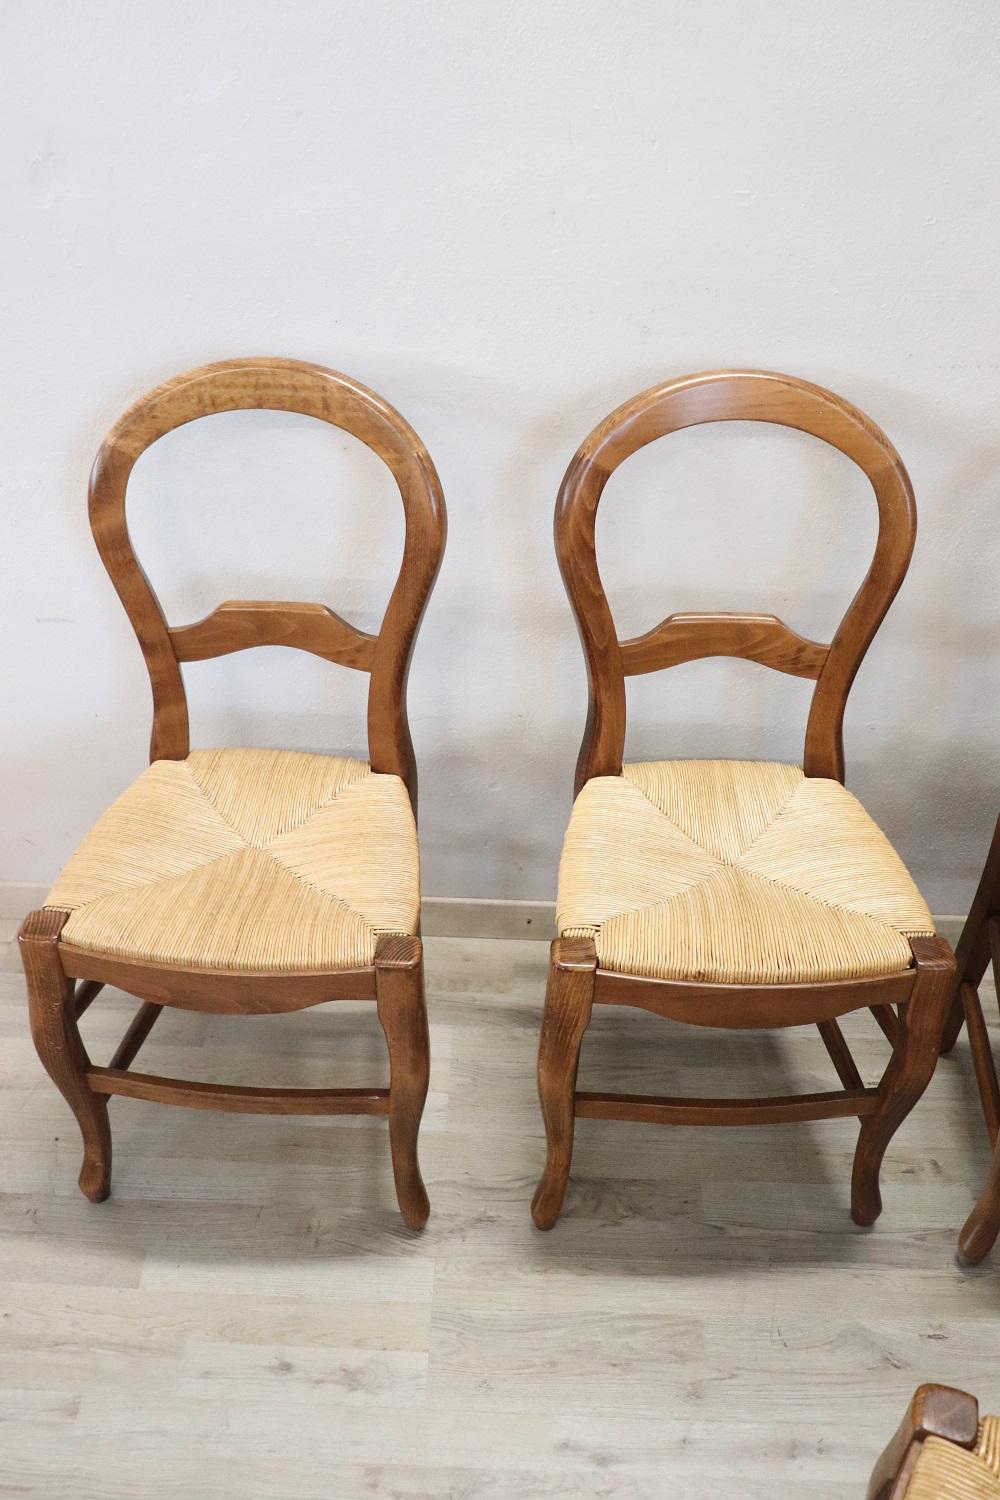 20th Century dining room set of six chairs in solid beech wood. The chairs are very elegant with very slender and solid moving legs. The seat is wide and comfortable in rustic straw. The chairs are in perfect condition ready to be used in your